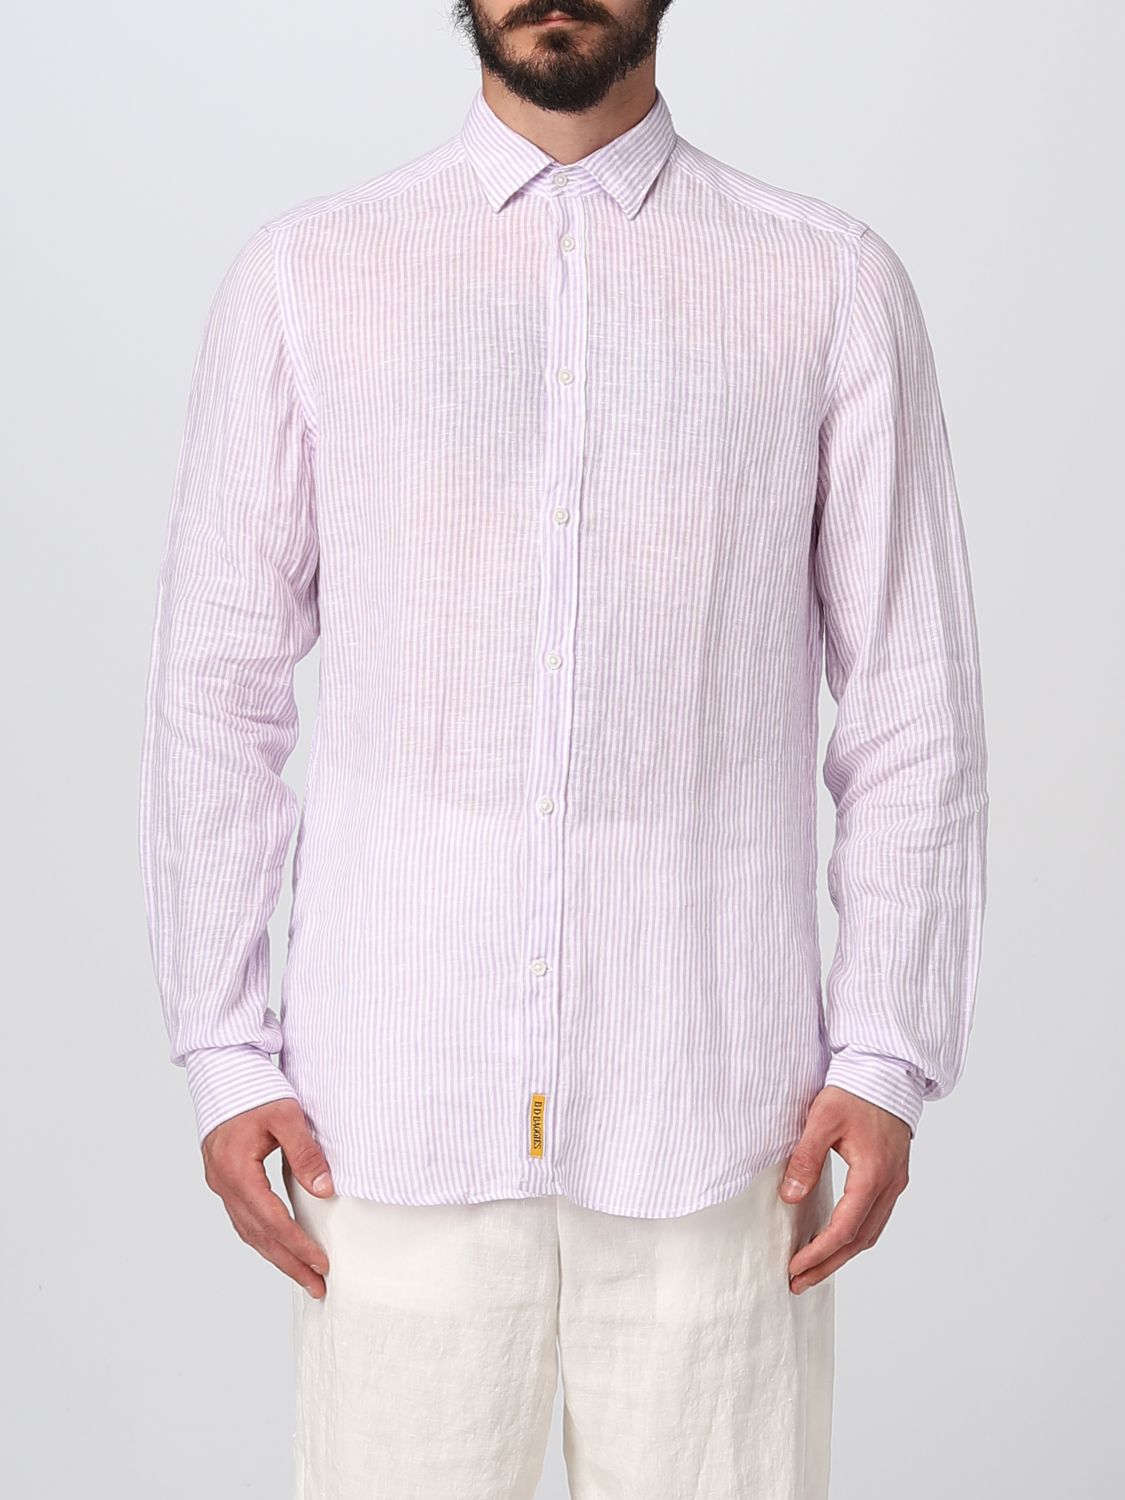 An American Tradition Shirt  Men In Lilac